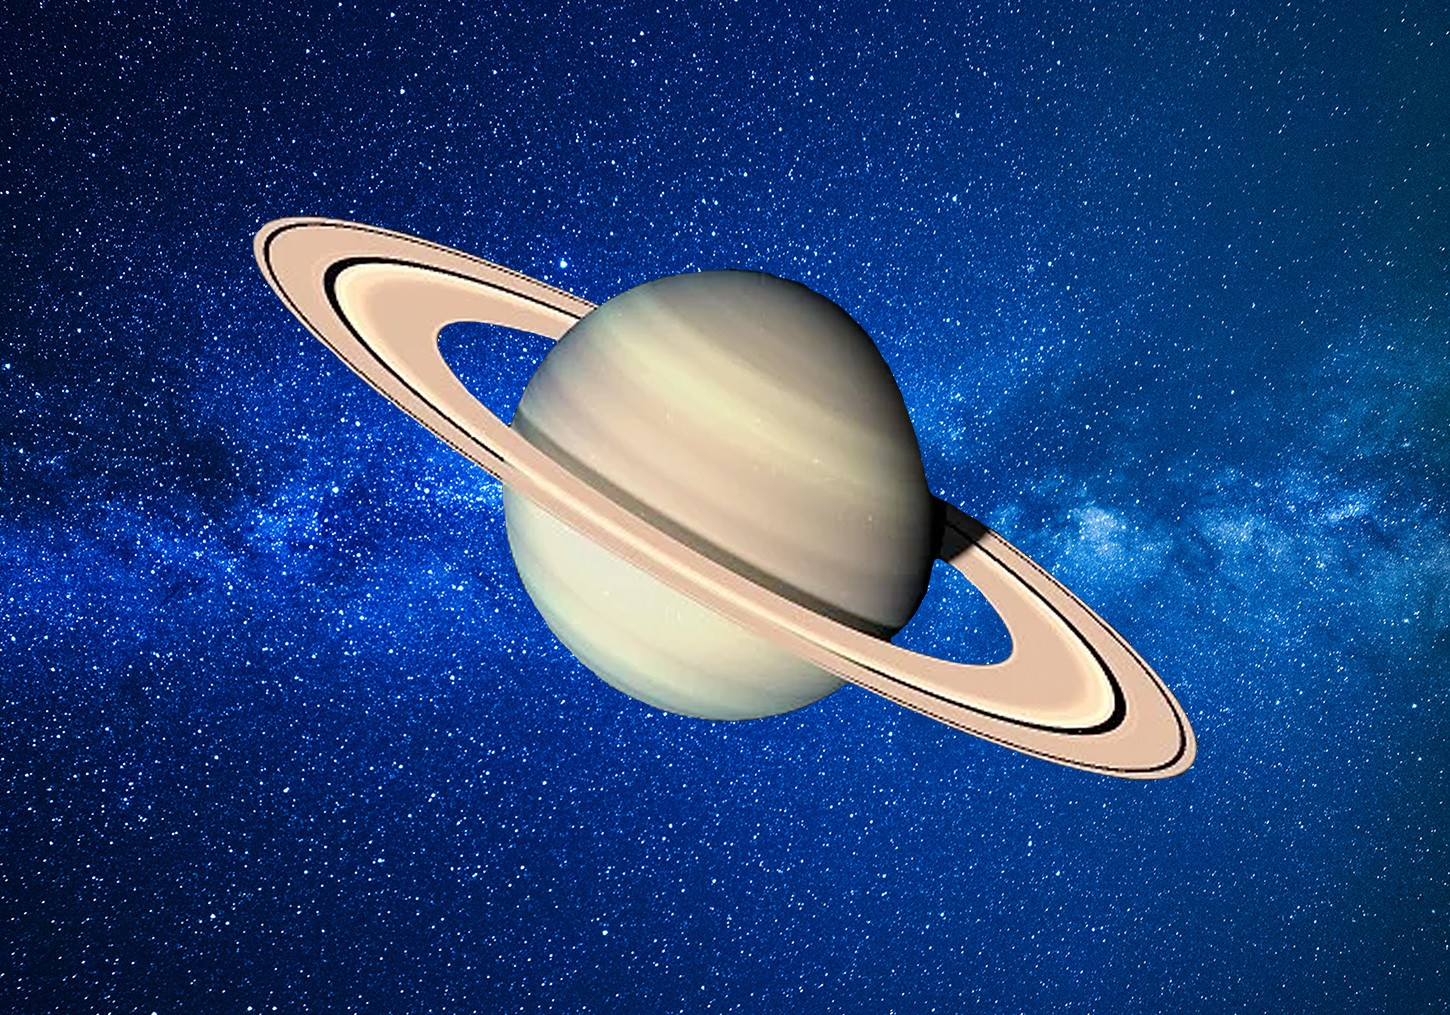 Meaning of Saturn